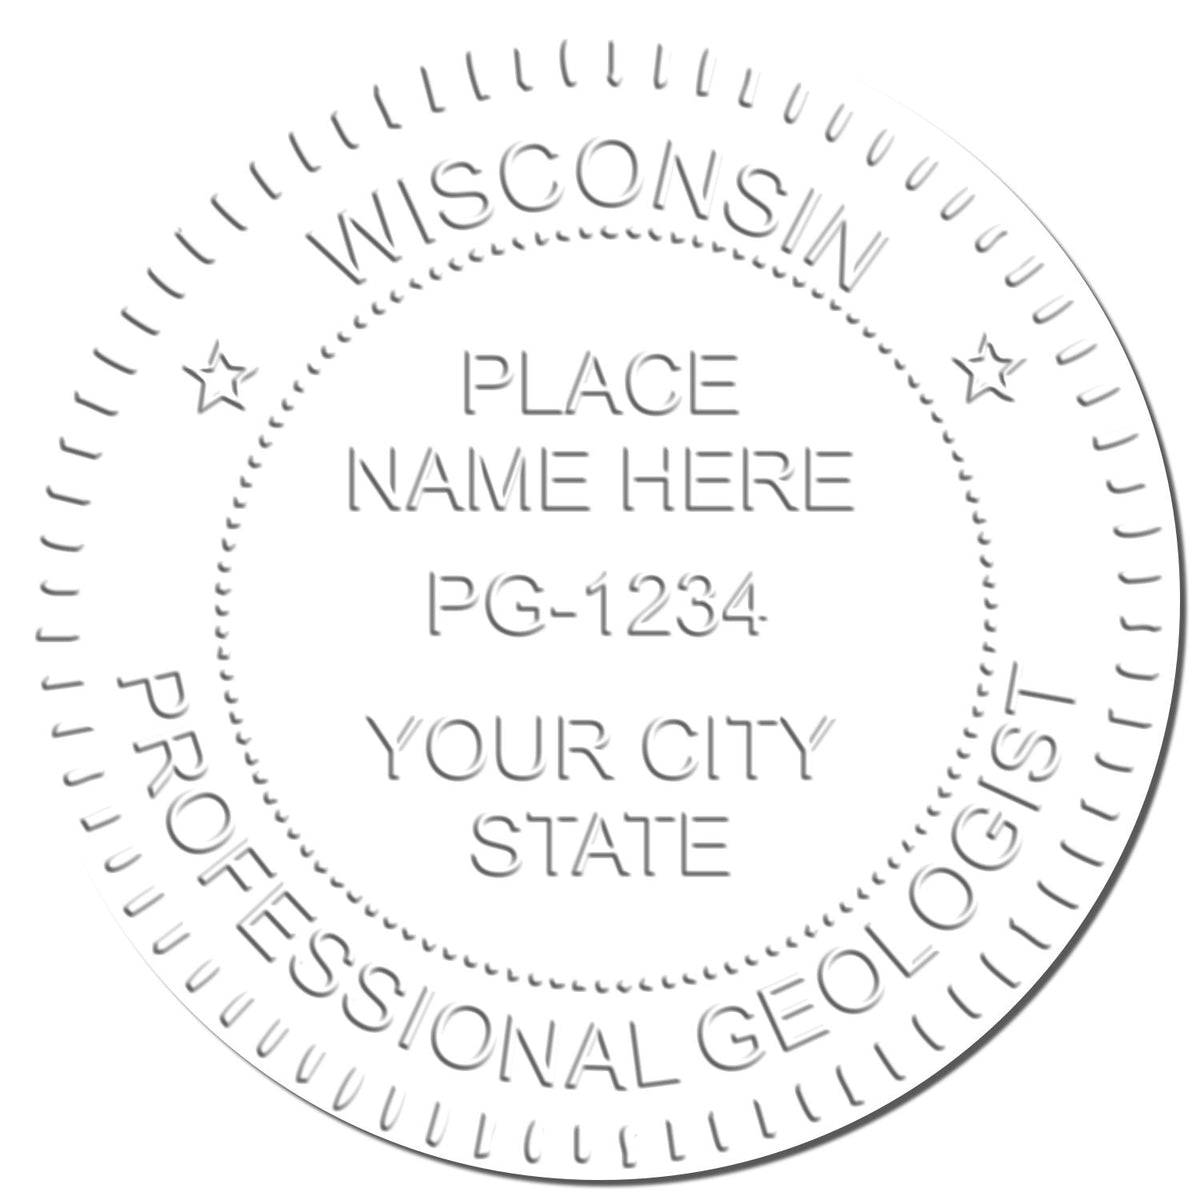 A photograph of the State of Wisconsin Extended Long Reach Geologist Seal stamp impression reveals a vivid, professional image of the on paper.